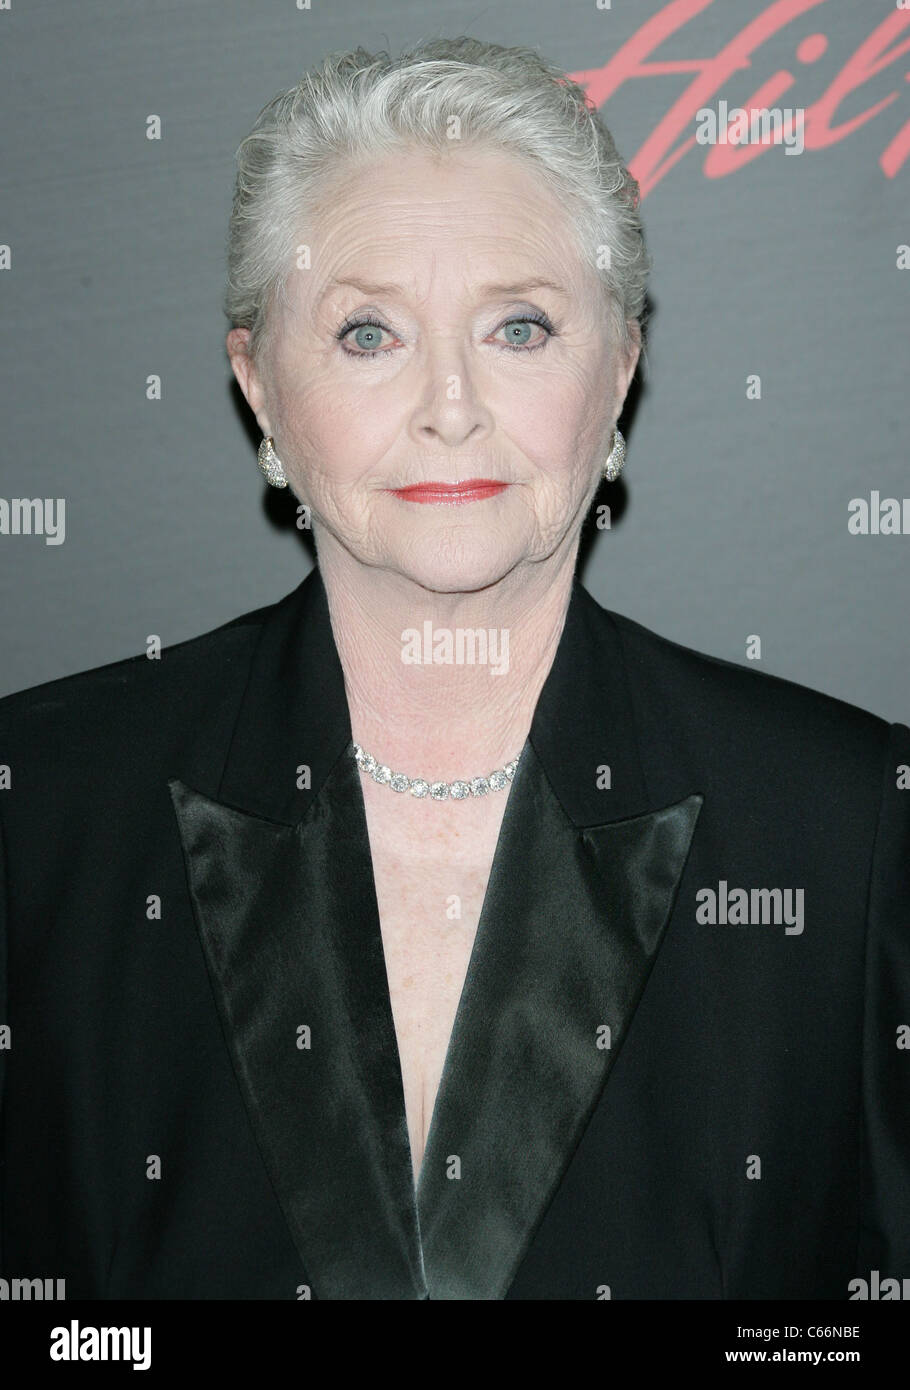 Susan Flannery at arrivals for 38th Annual Daytime Entertainment Emmy Awards - ARRIVALS, Hilton Hotel, Las Vegas, NV June 19, 2011. Photo By: James Atoa/Everett Collection Stock Photo